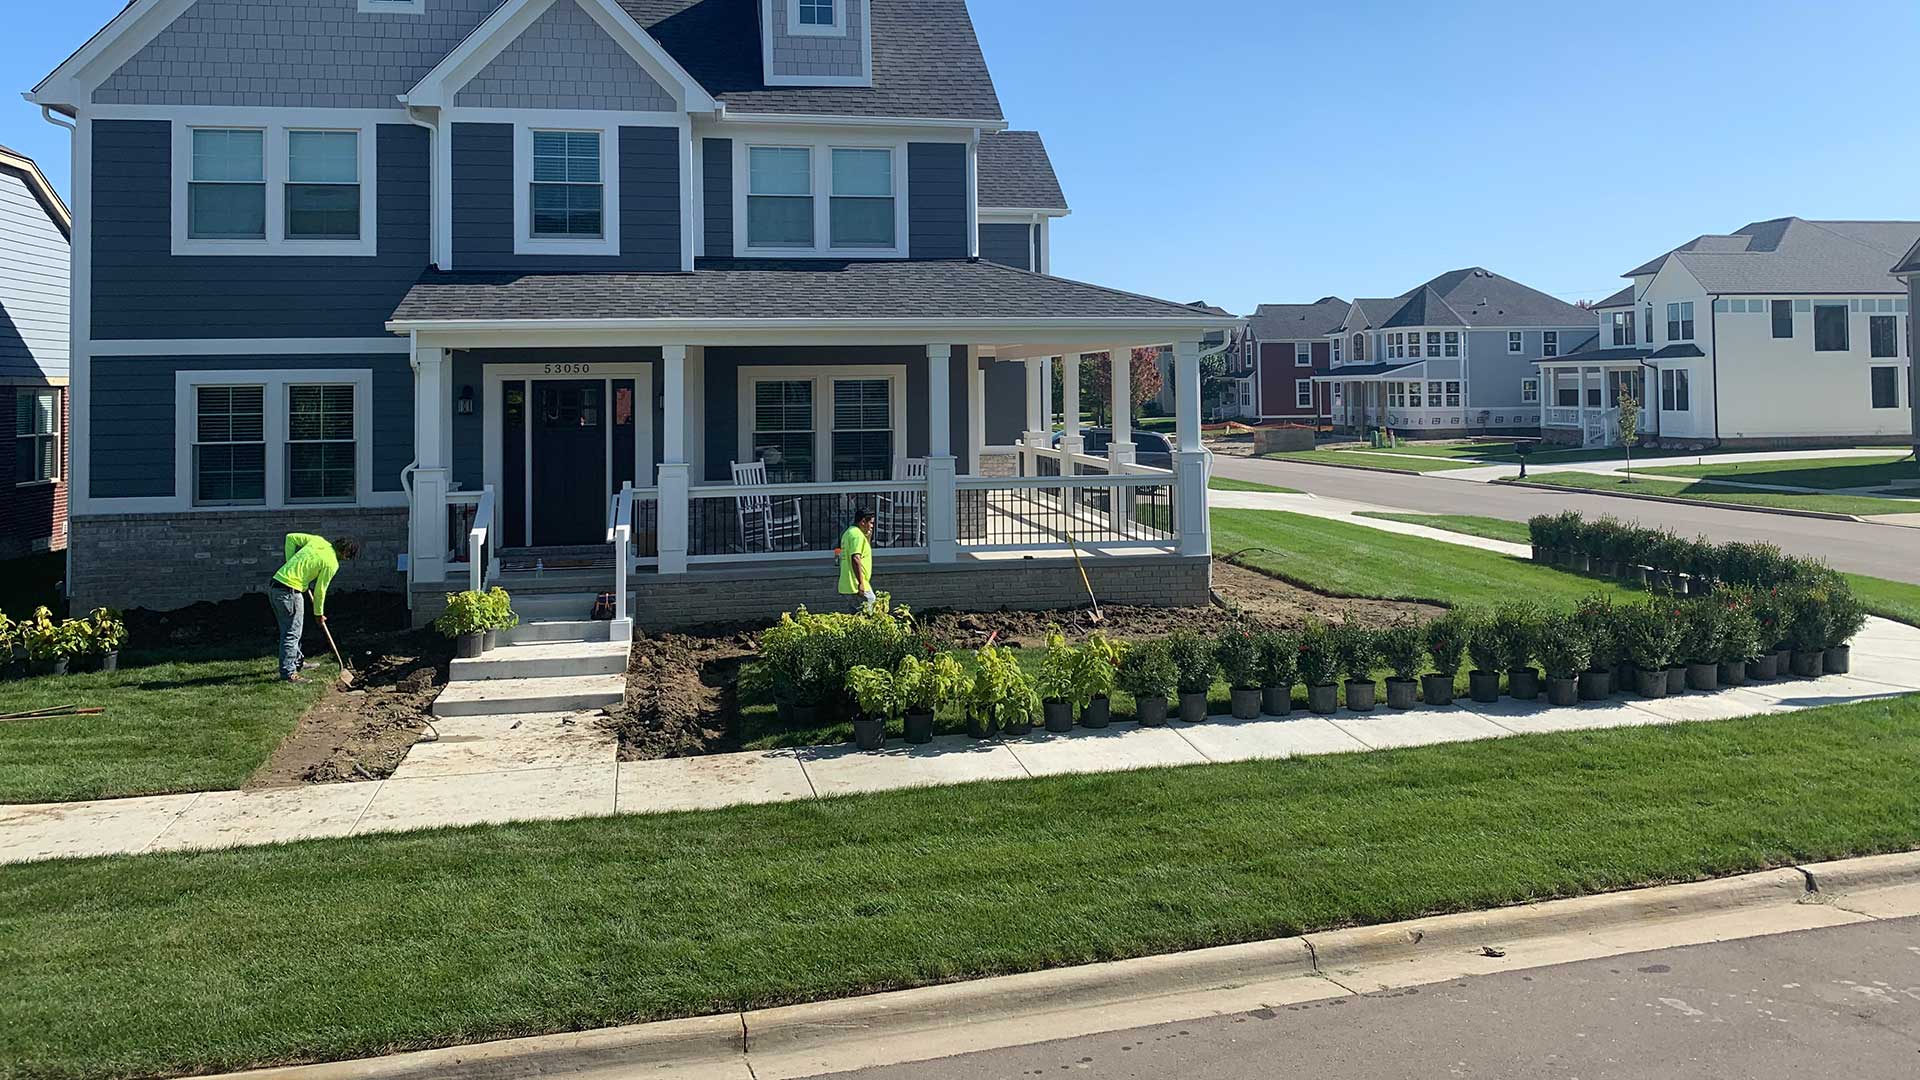 Landscape workers performing a bed renovation with plantings near Macomb, MI.